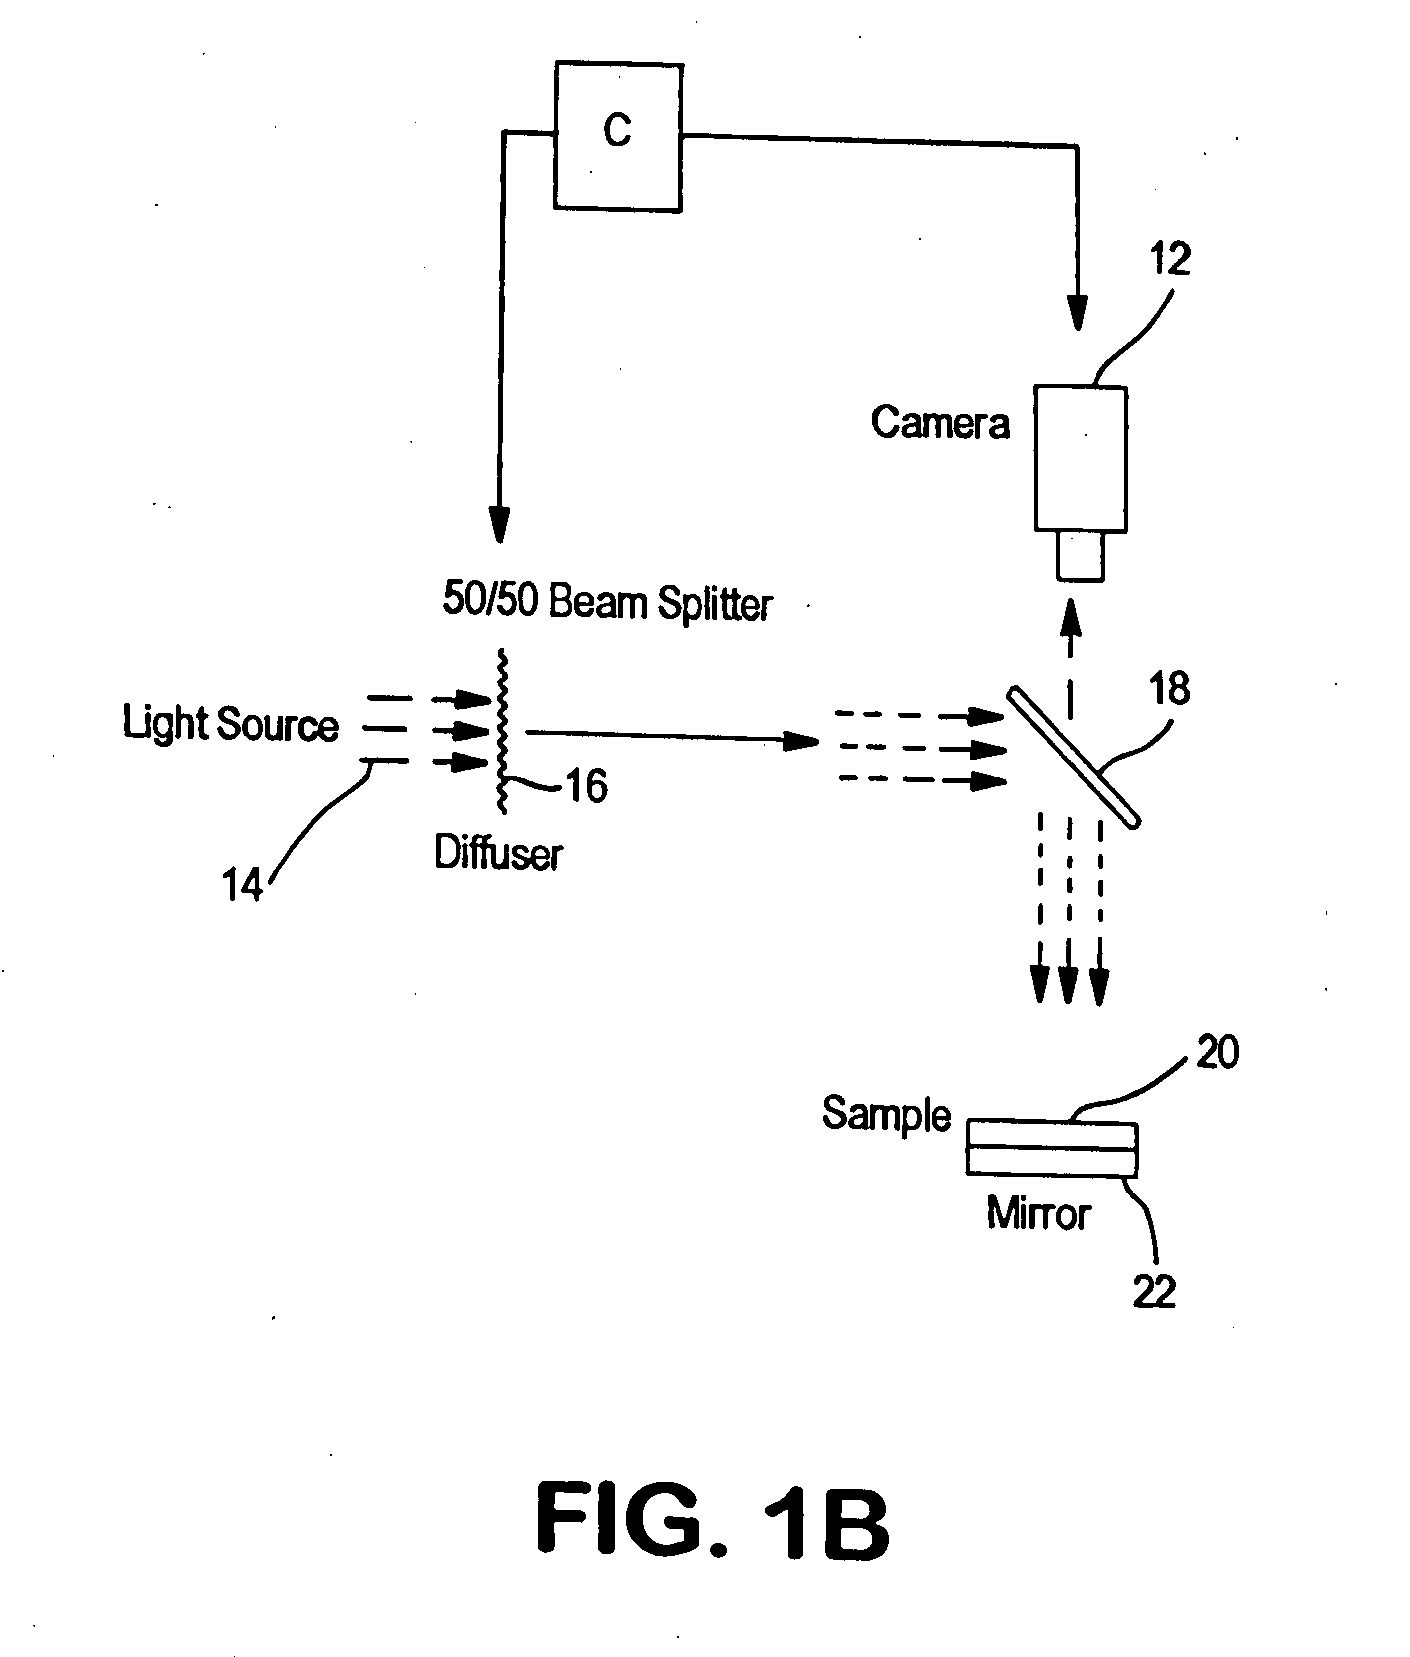 Optical method for evaluating surface and physical properties of structures made wholly or partially from fibers, films, polymers or a combination thereof